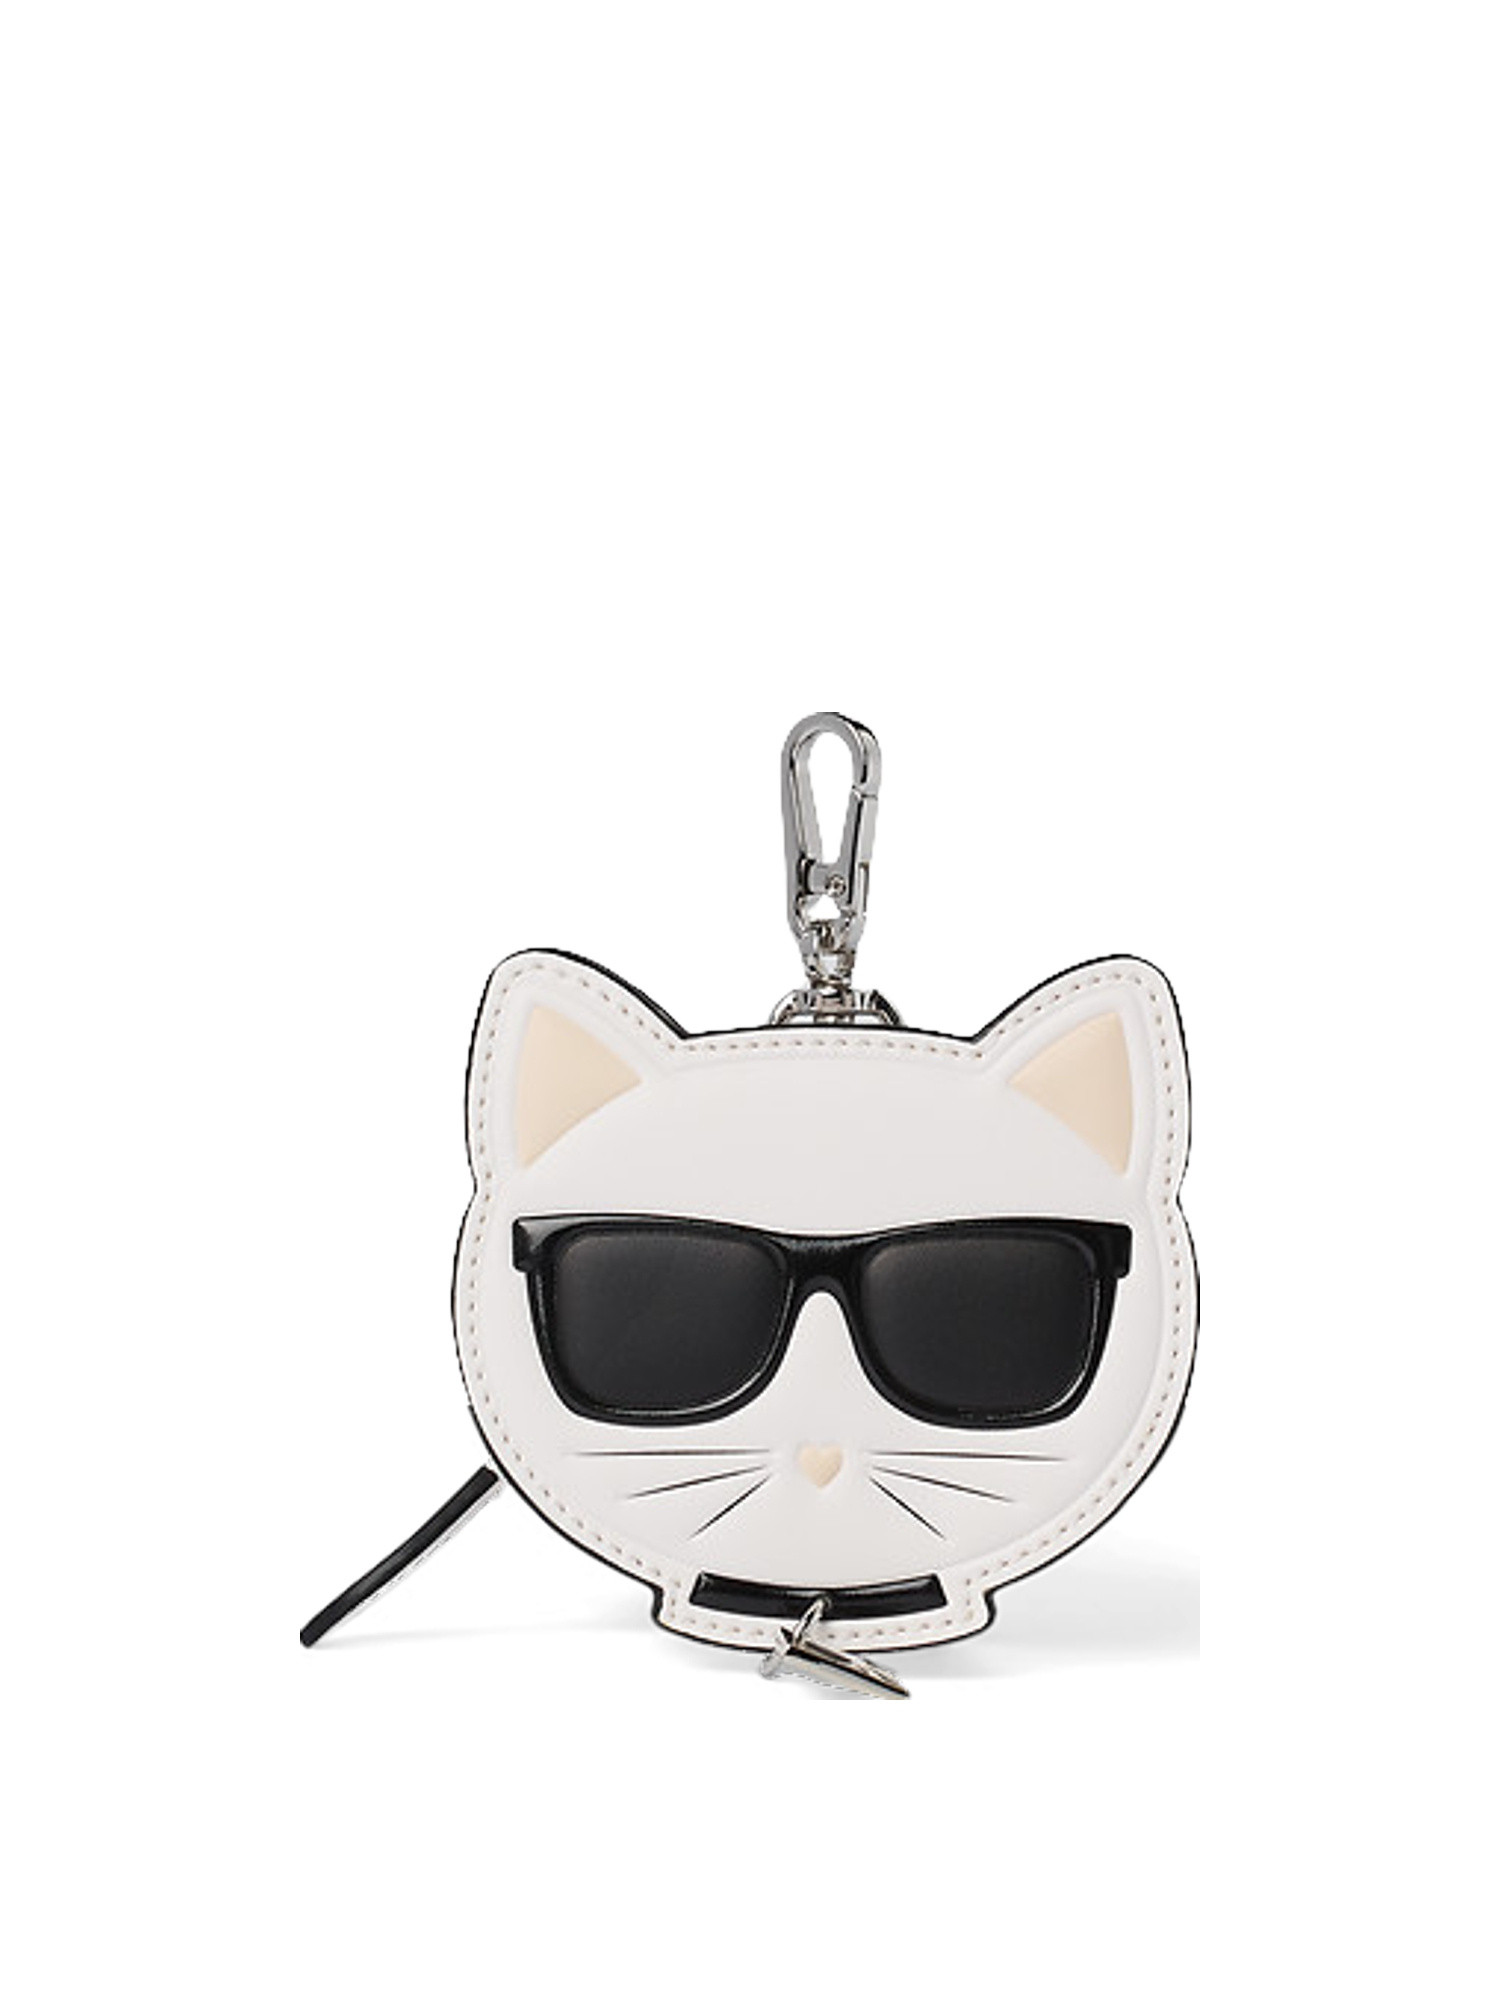 Karl Lagerfeld - K/Choupette Coin Purse, Black, large image number 0